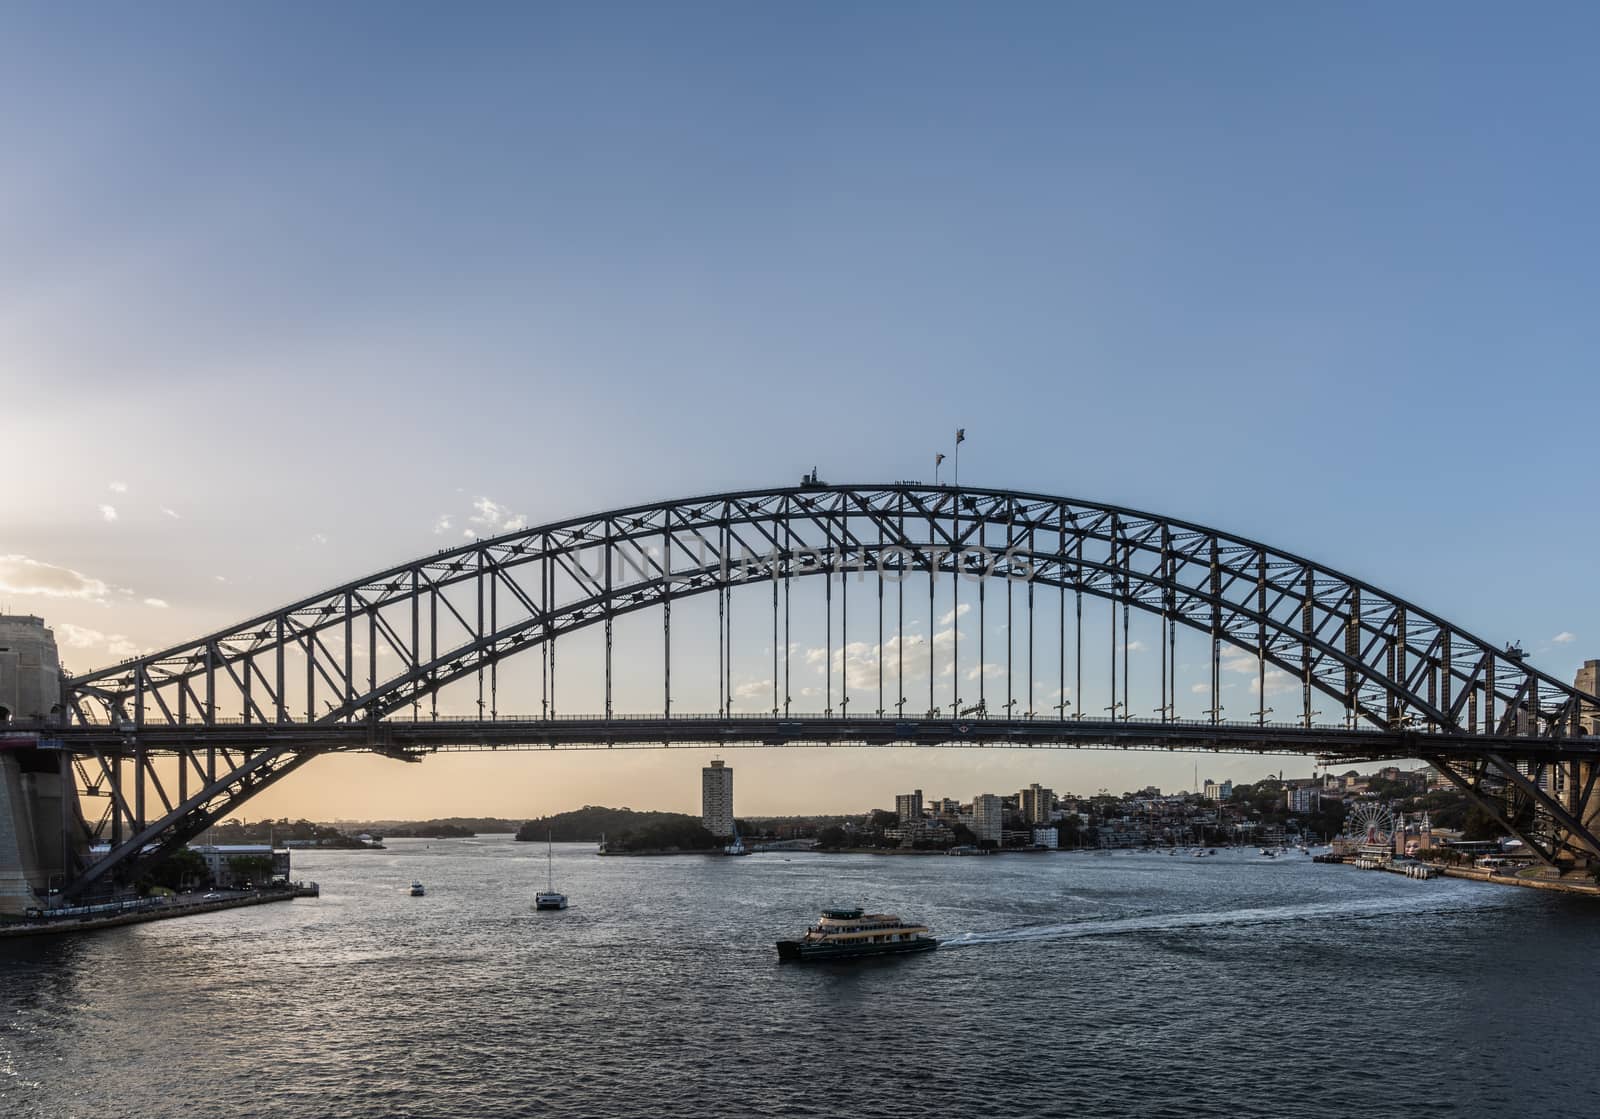 Sydney, Australia - February 12, 2019: Harbour bridge against pale blue sky during sunset. Horizon is north shore of bay with Kirribilli neighborhood and Luna Park. Boats on water.